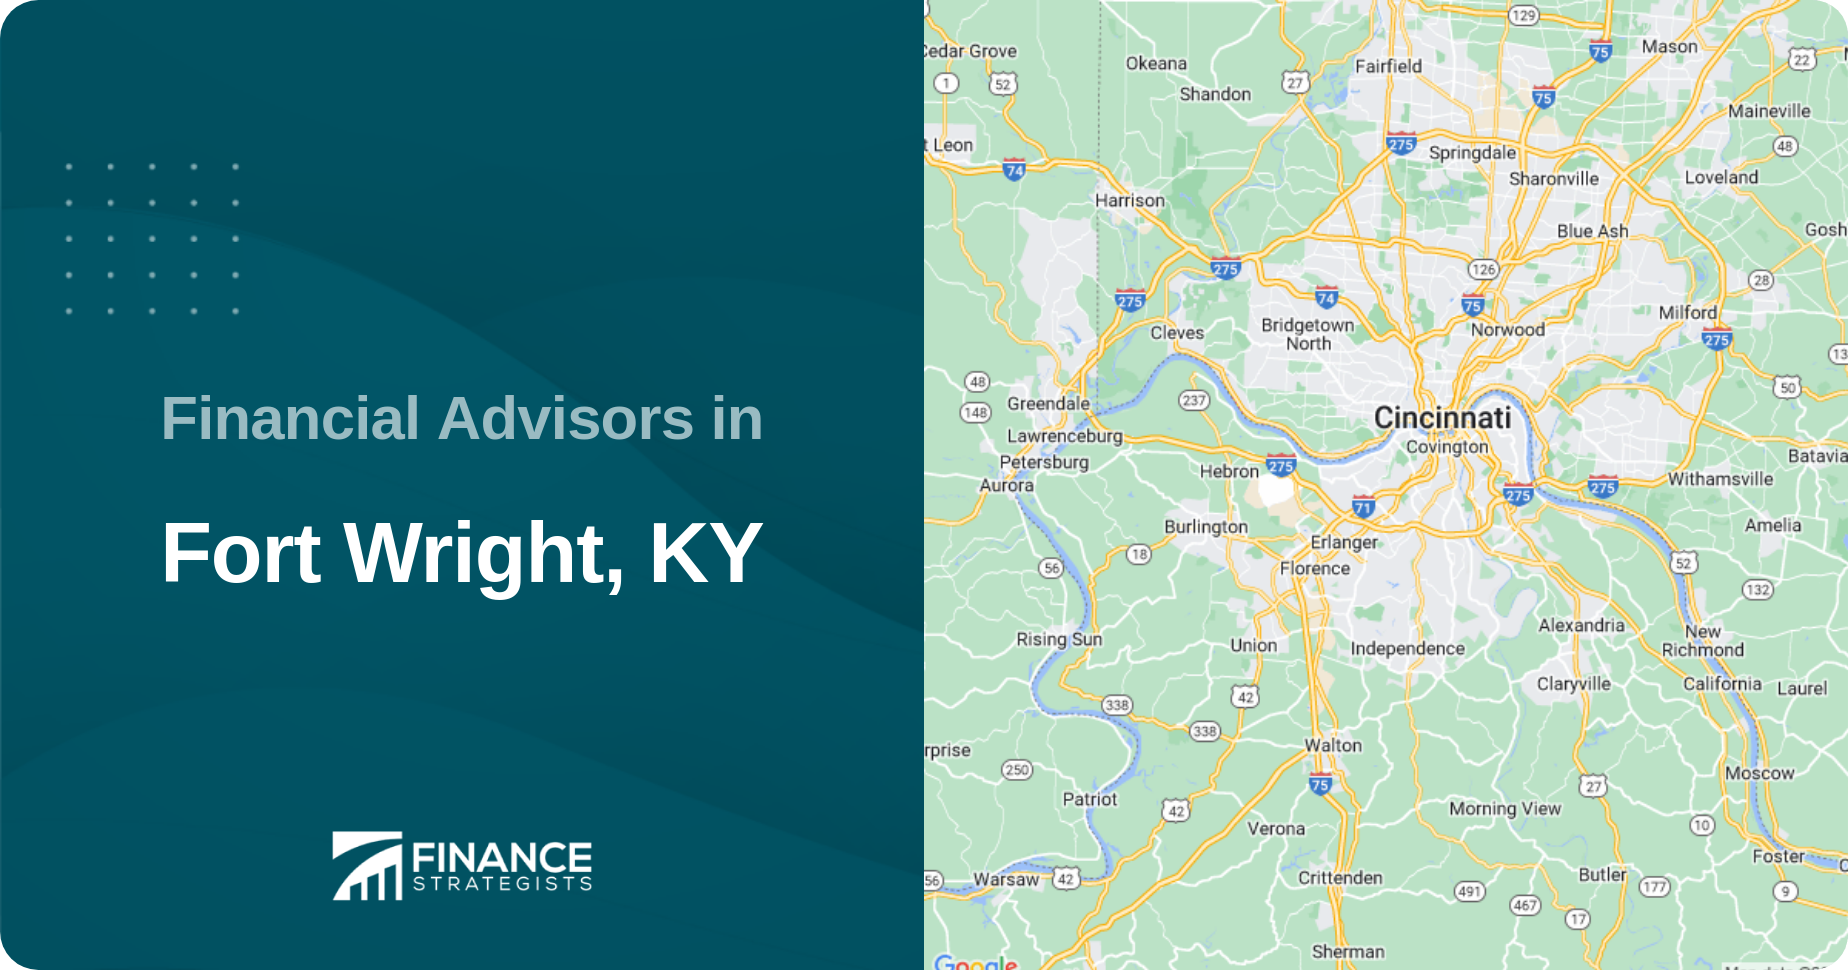 Financial Advisors in Fort Wright, KY